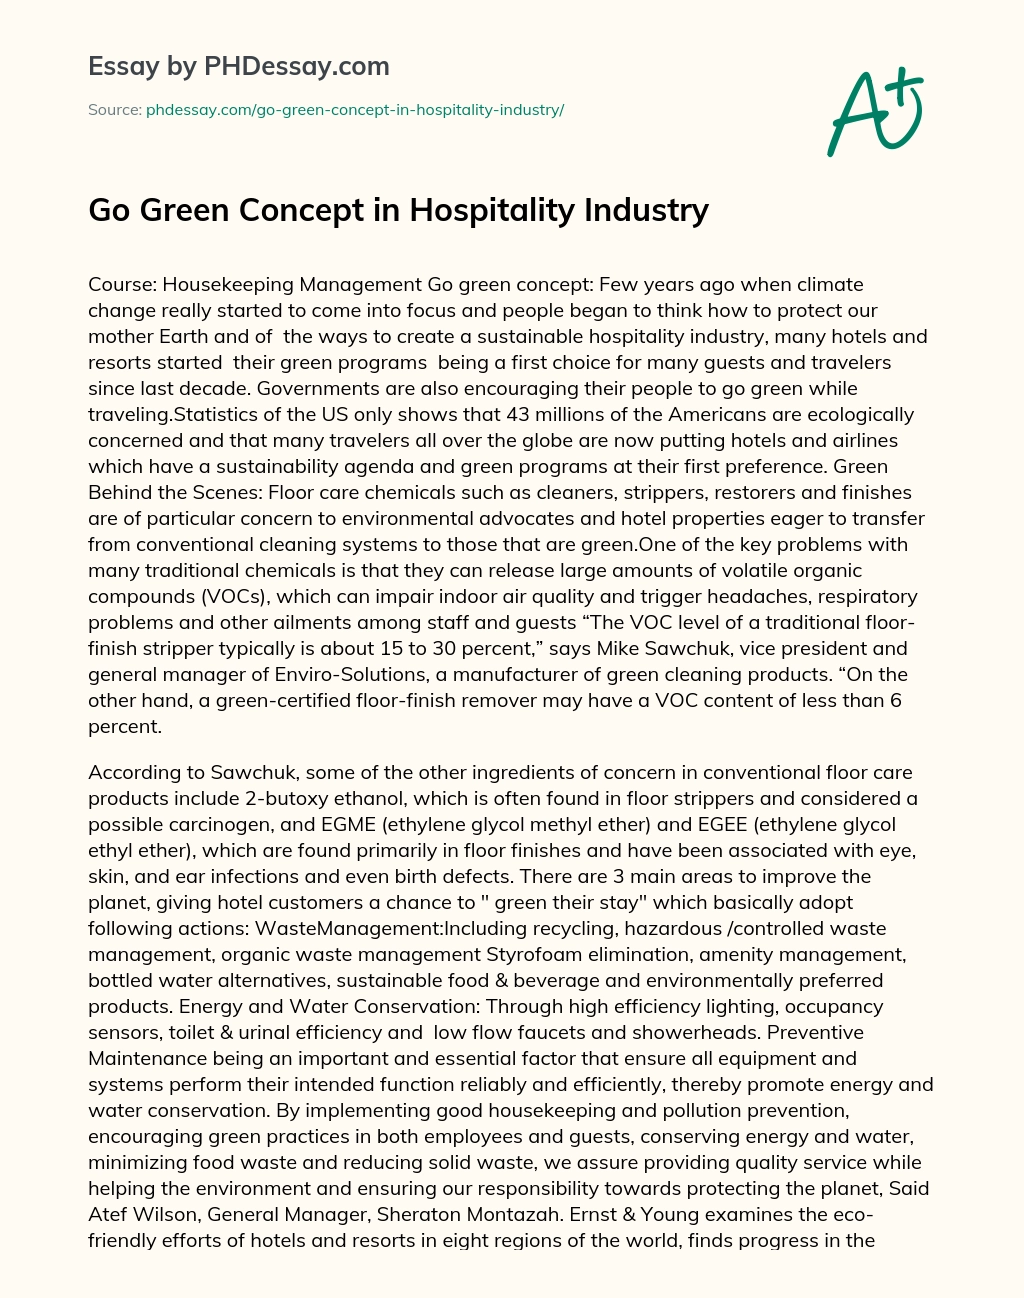 Go Green Concept in Hospitality Industry essay